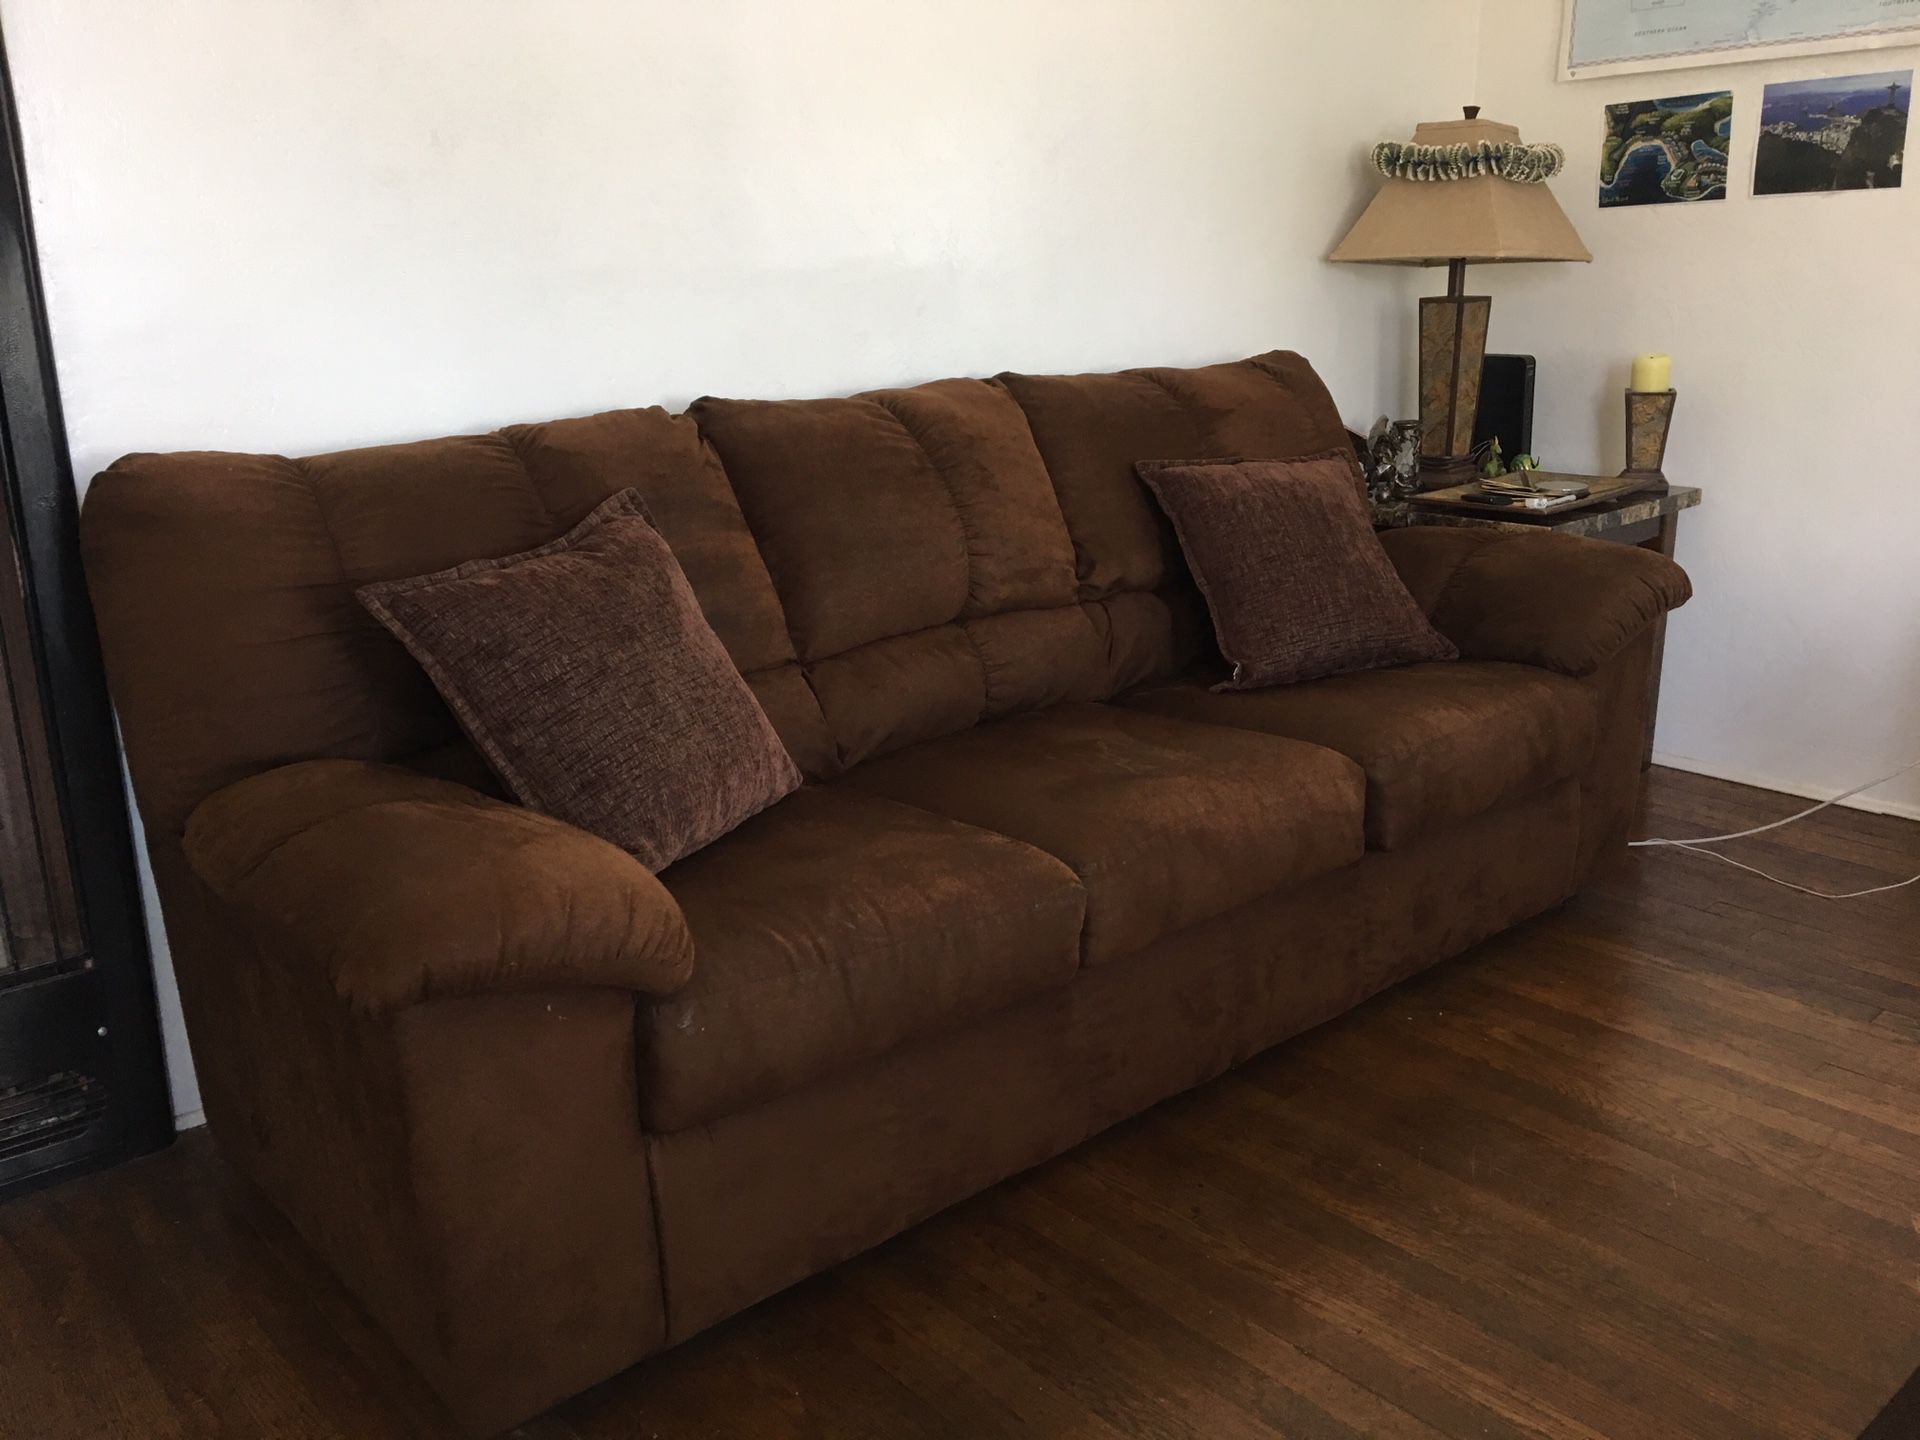 Brown suede couch & recliner